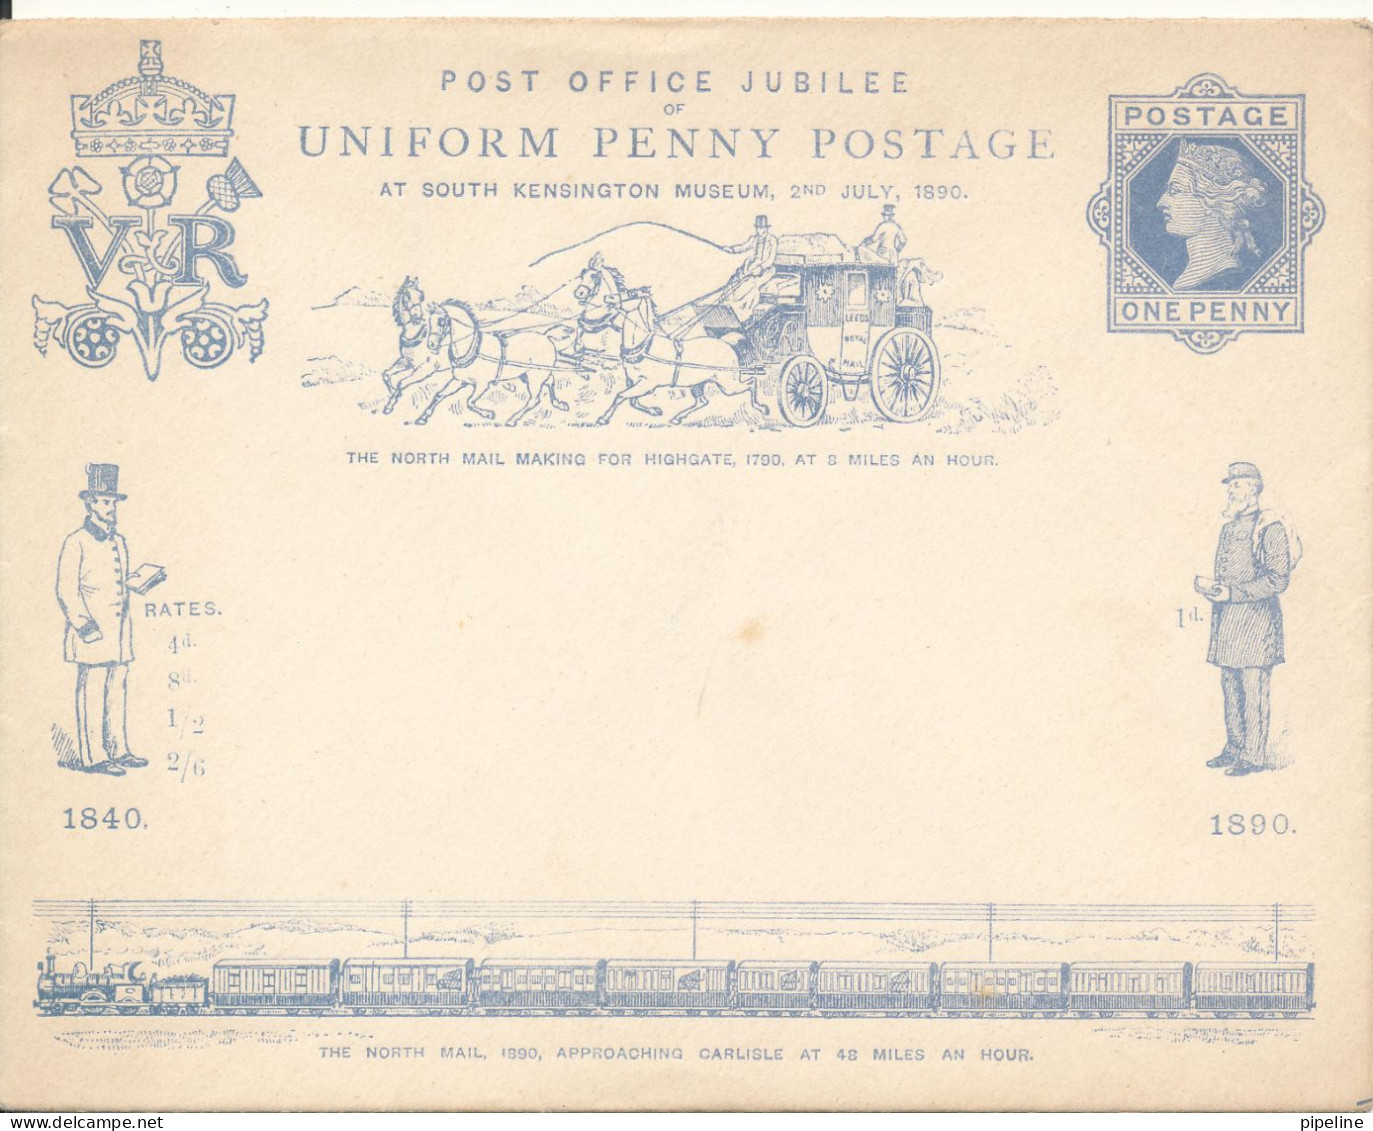 Great Britain Unused Postal Stationery 1890 Post Office Jubilee Uniform Penny Postage With Cachet - Luftpost & Aerogramme